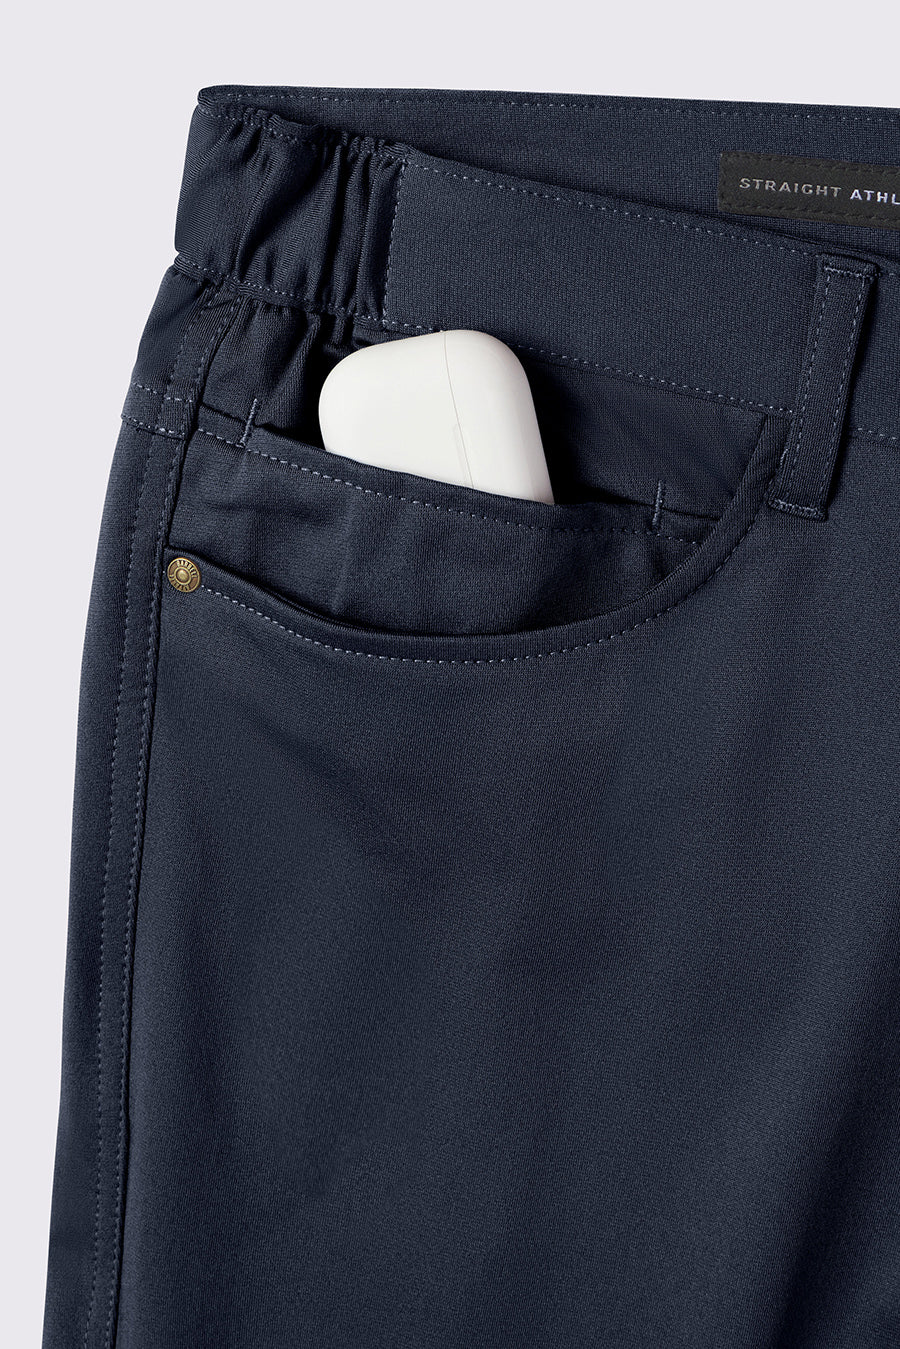 Anything Pant Straight - Navy - photo from pocket #color_navy